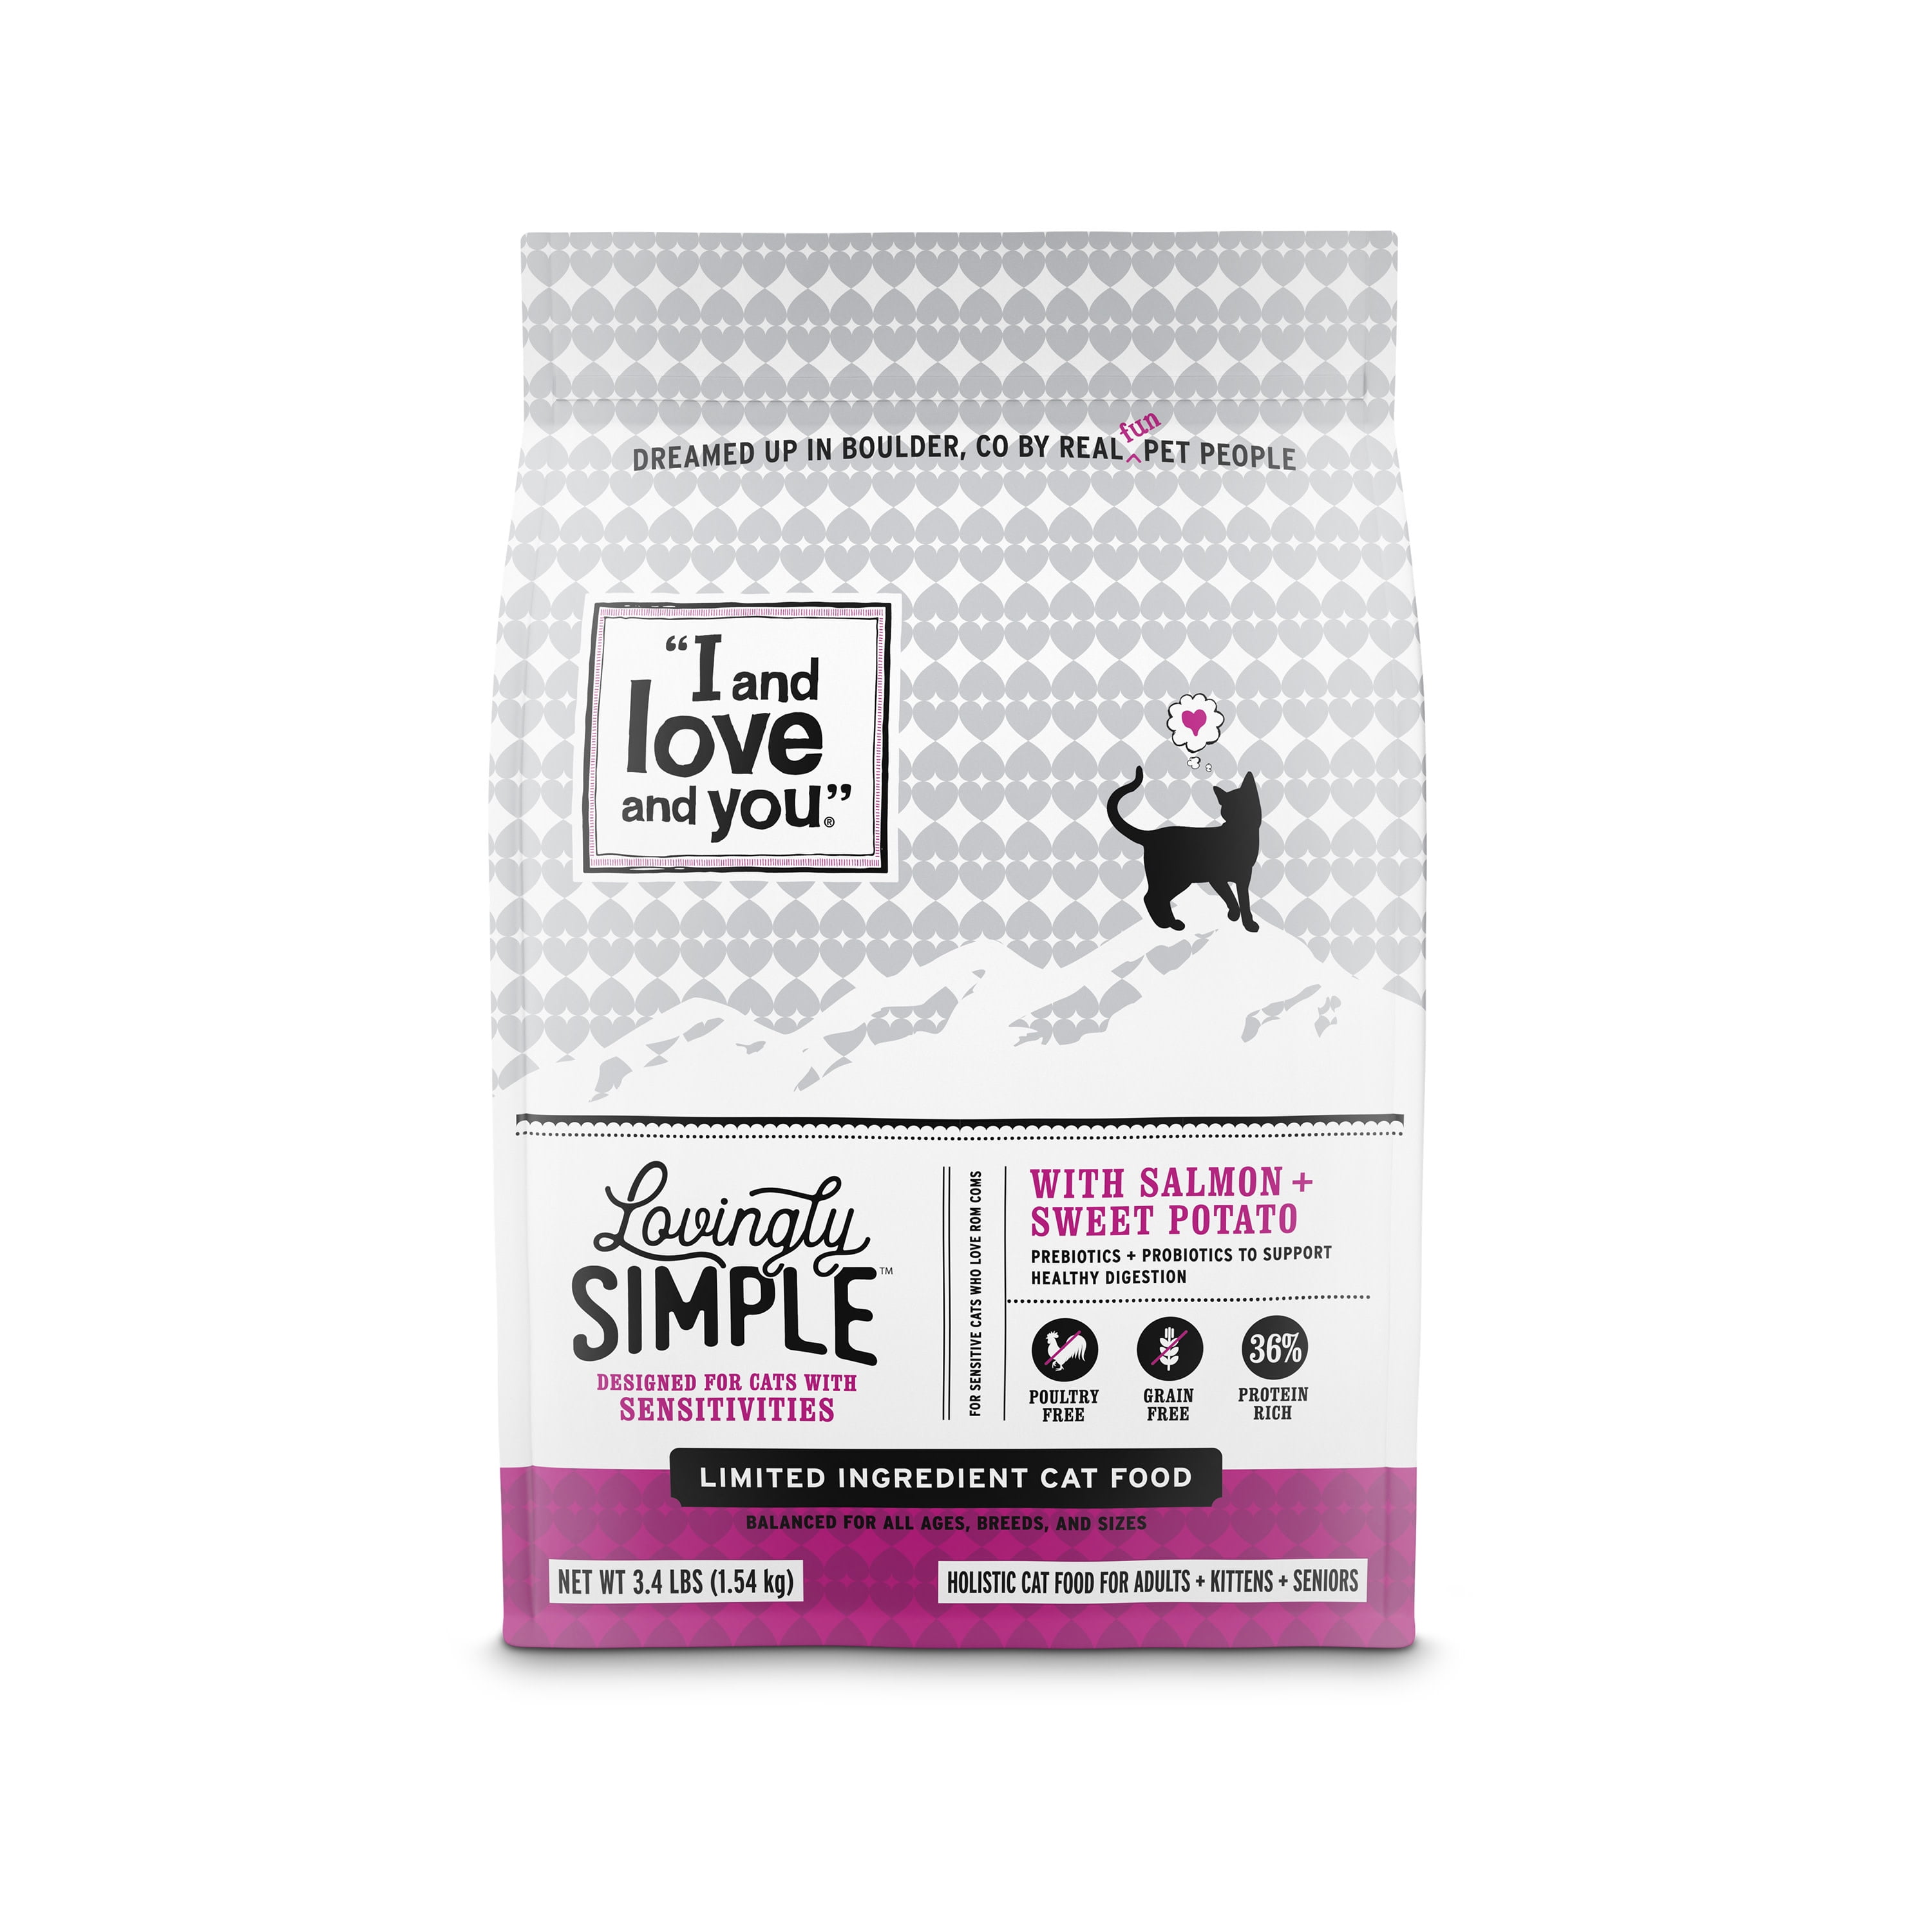 (24 Pack) "I and love and you" Oh My Cod! Pate Wet Cat Food, 3 oz